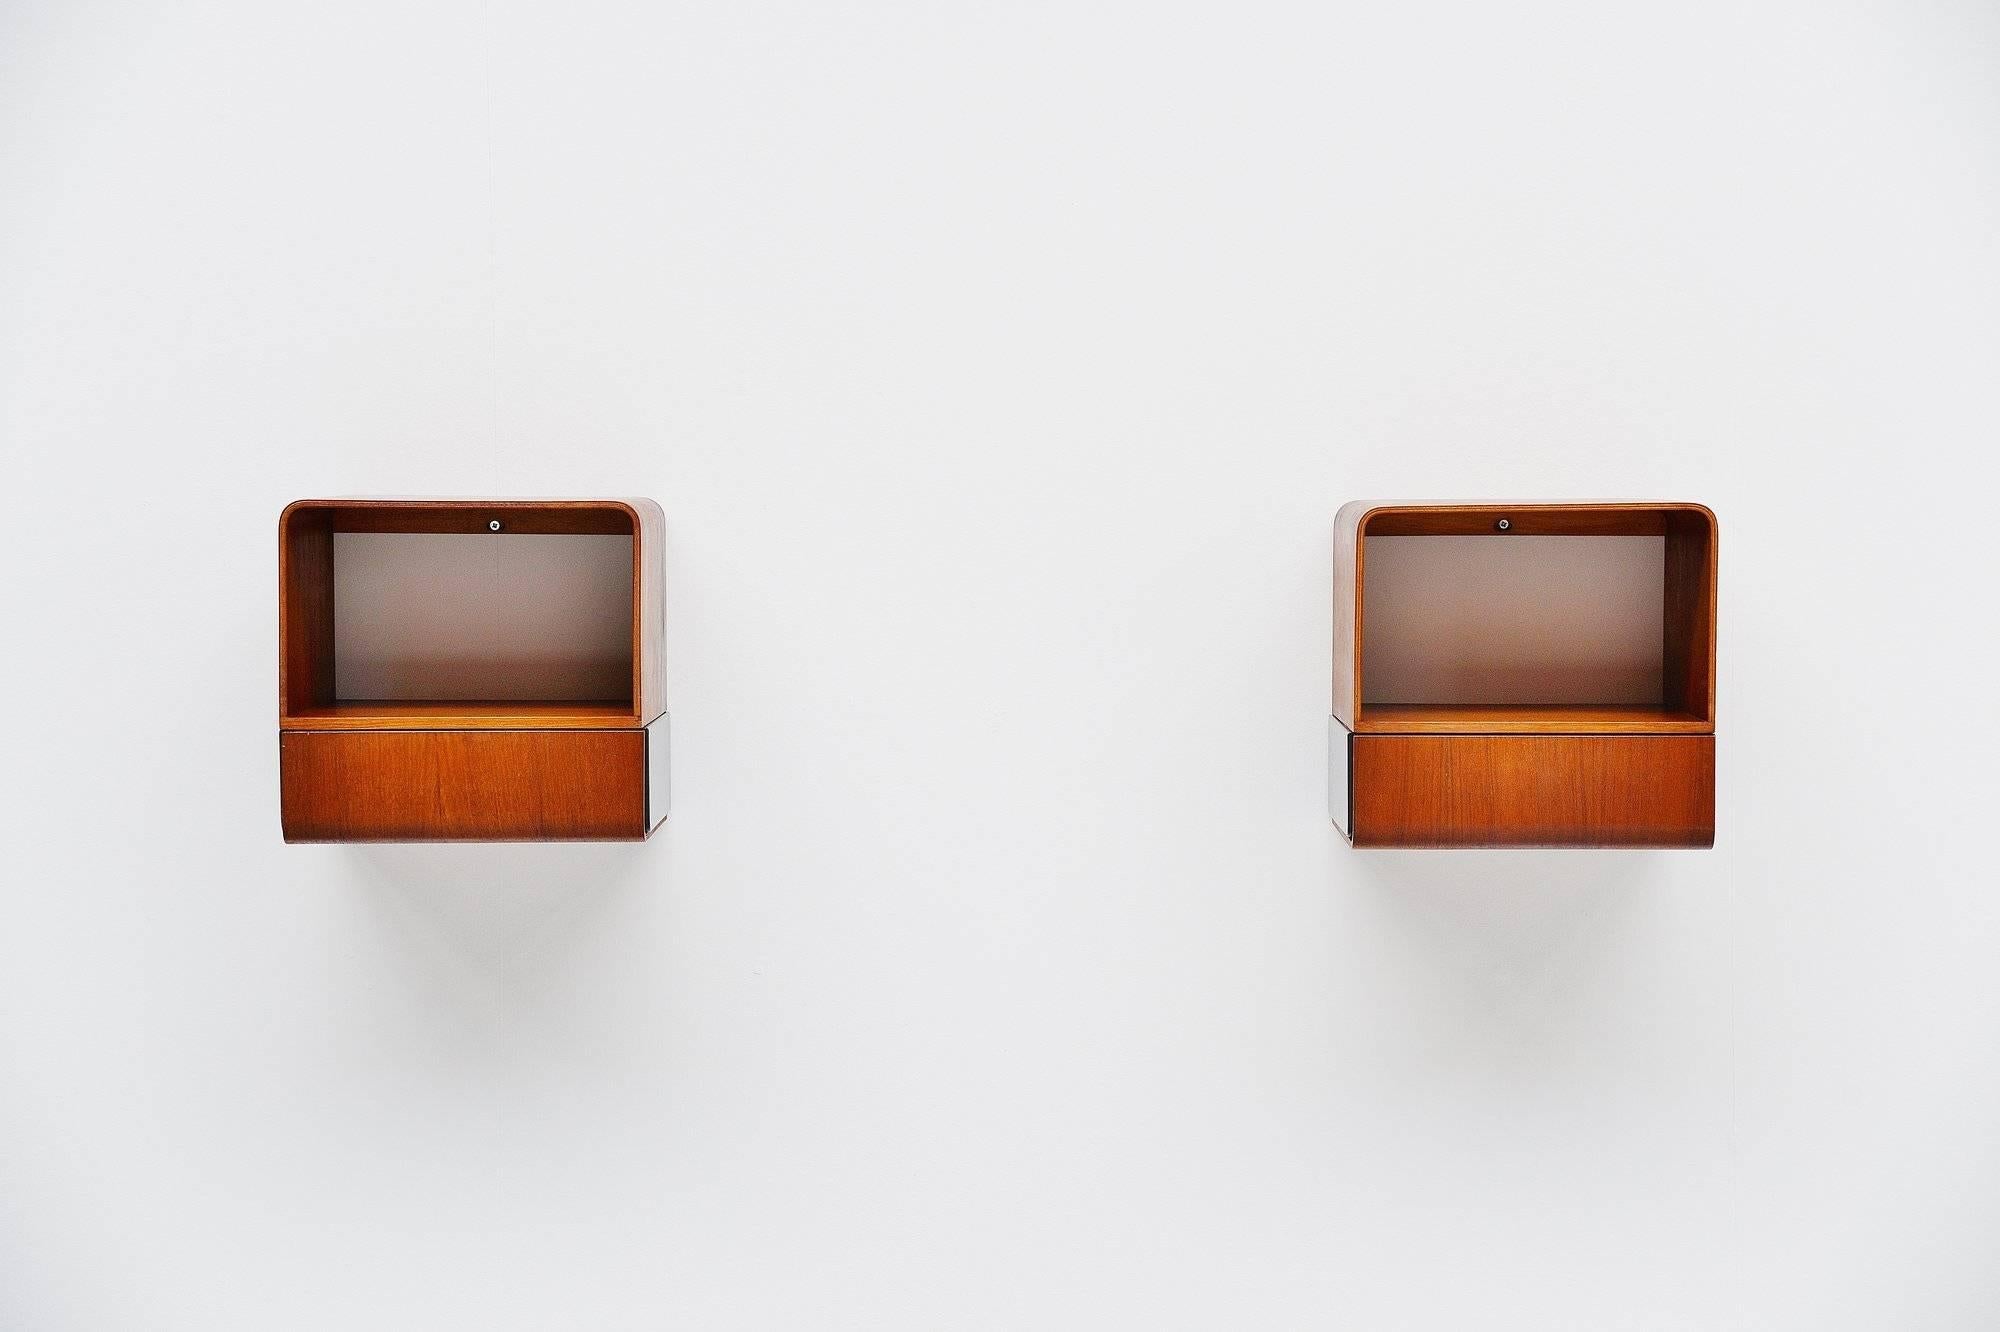 Very rare pair of bed cabinets designed by Friso Kramer for Auping, Holland 1963. These cabinets are from the Euroika series designed by Kramer in 1963. The Euroika series had a Bed, bed cabinets, table, chair, mirror and a toilet cabinet. All items